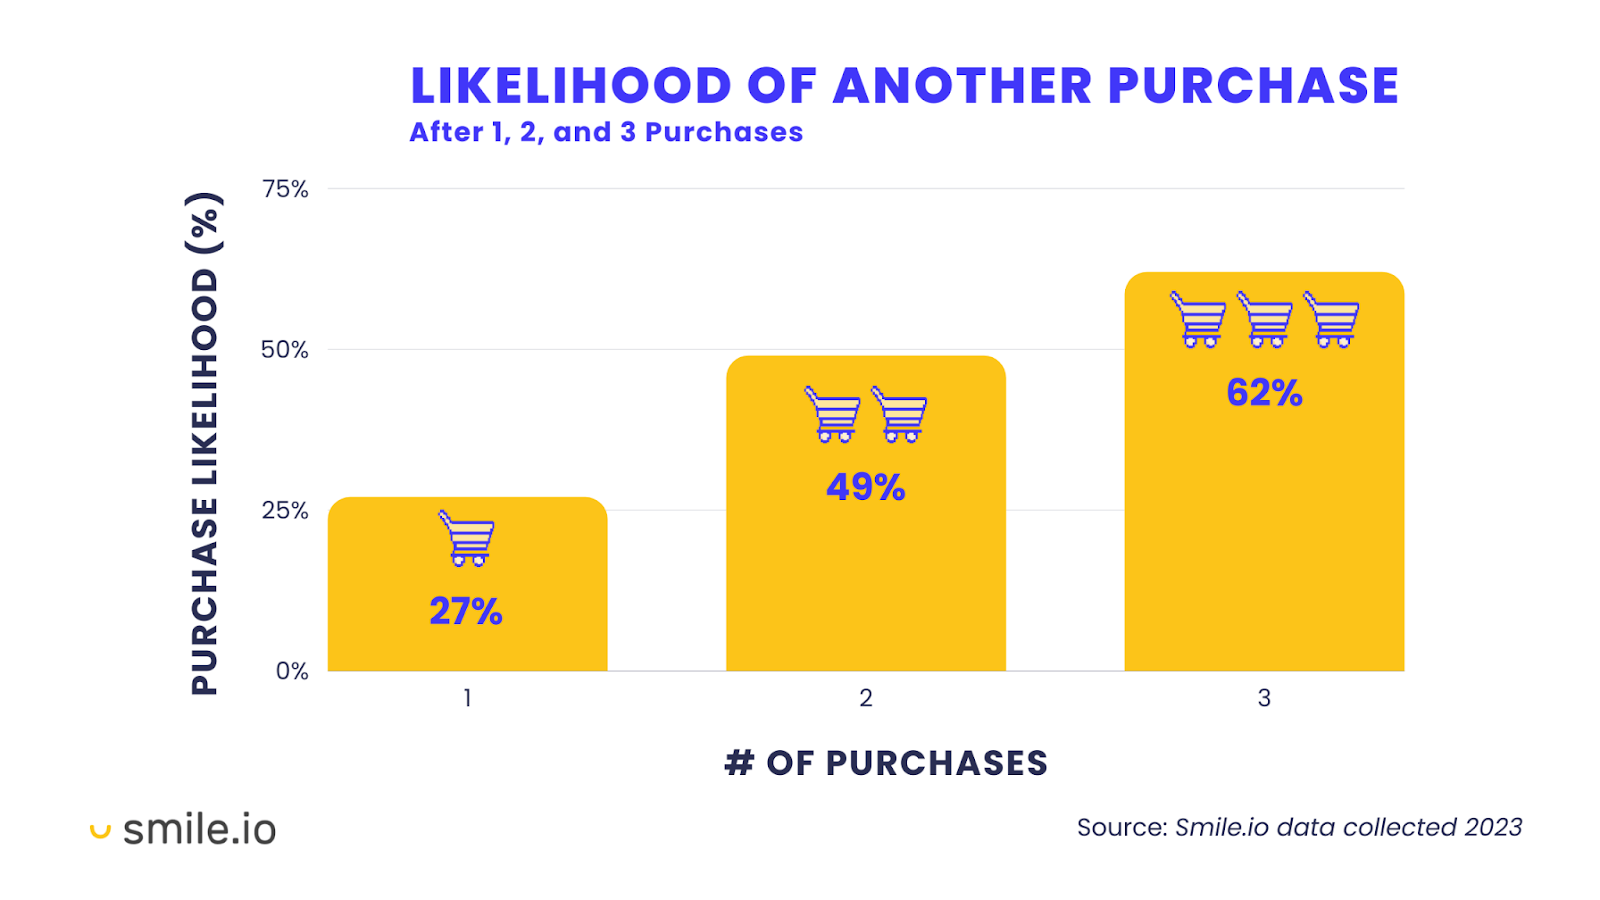 Smile.io's graph showing the likelihood of another purchase after 1, 2, and 3 purchases